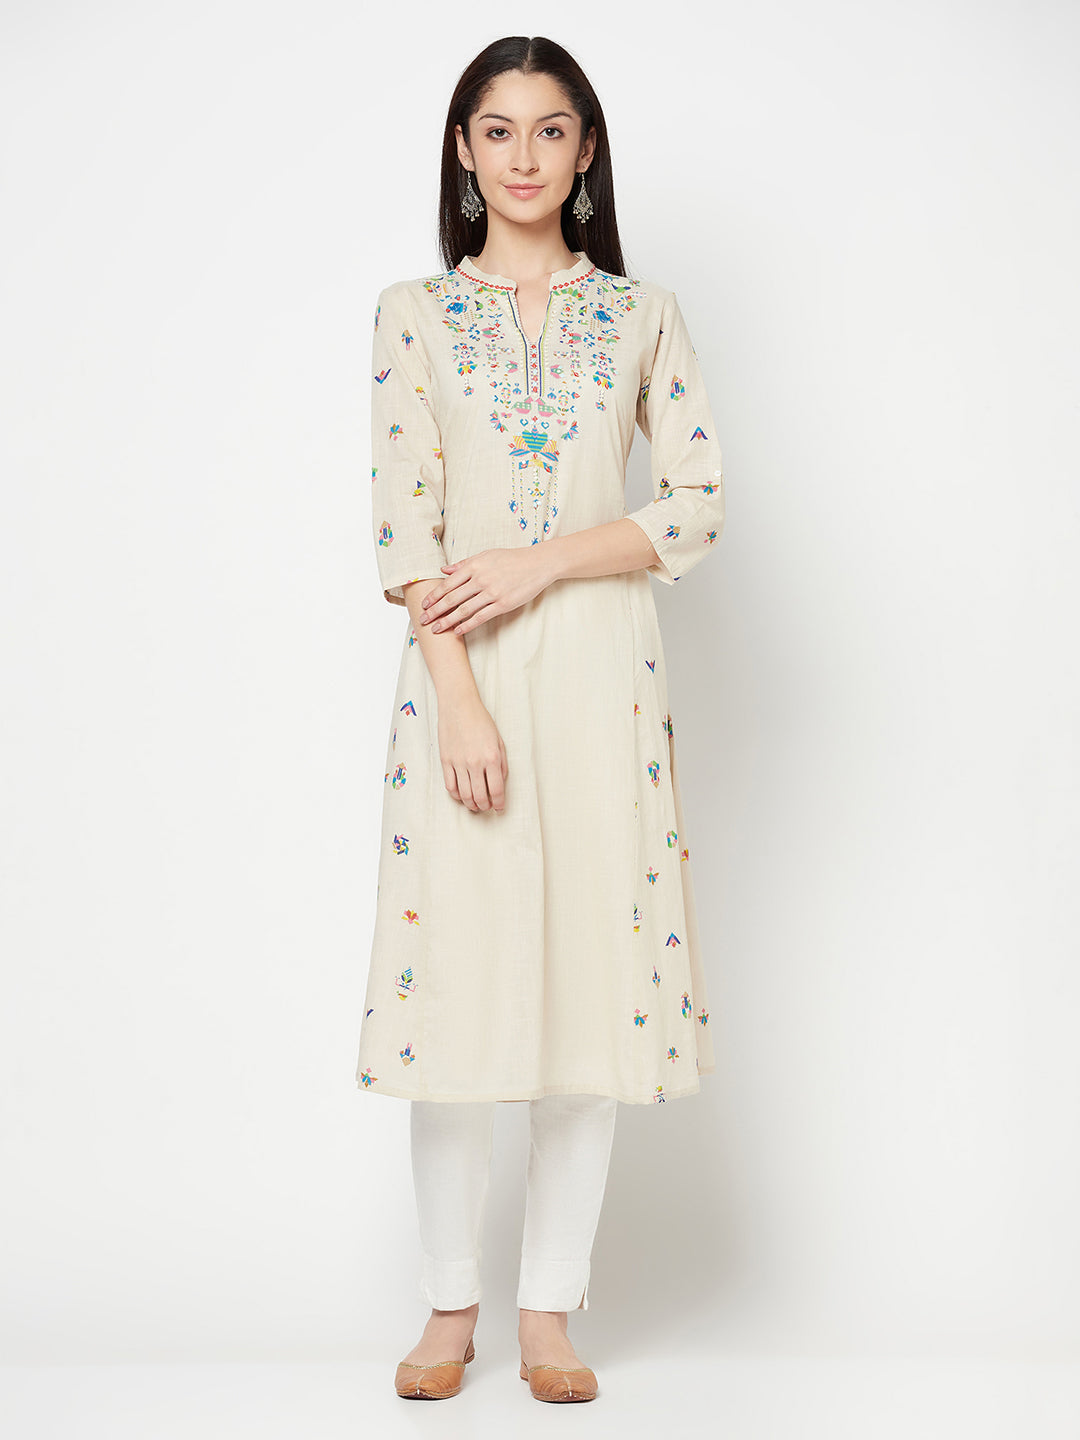 Range in Budget Off White Kurti with Sequins work LKV002361